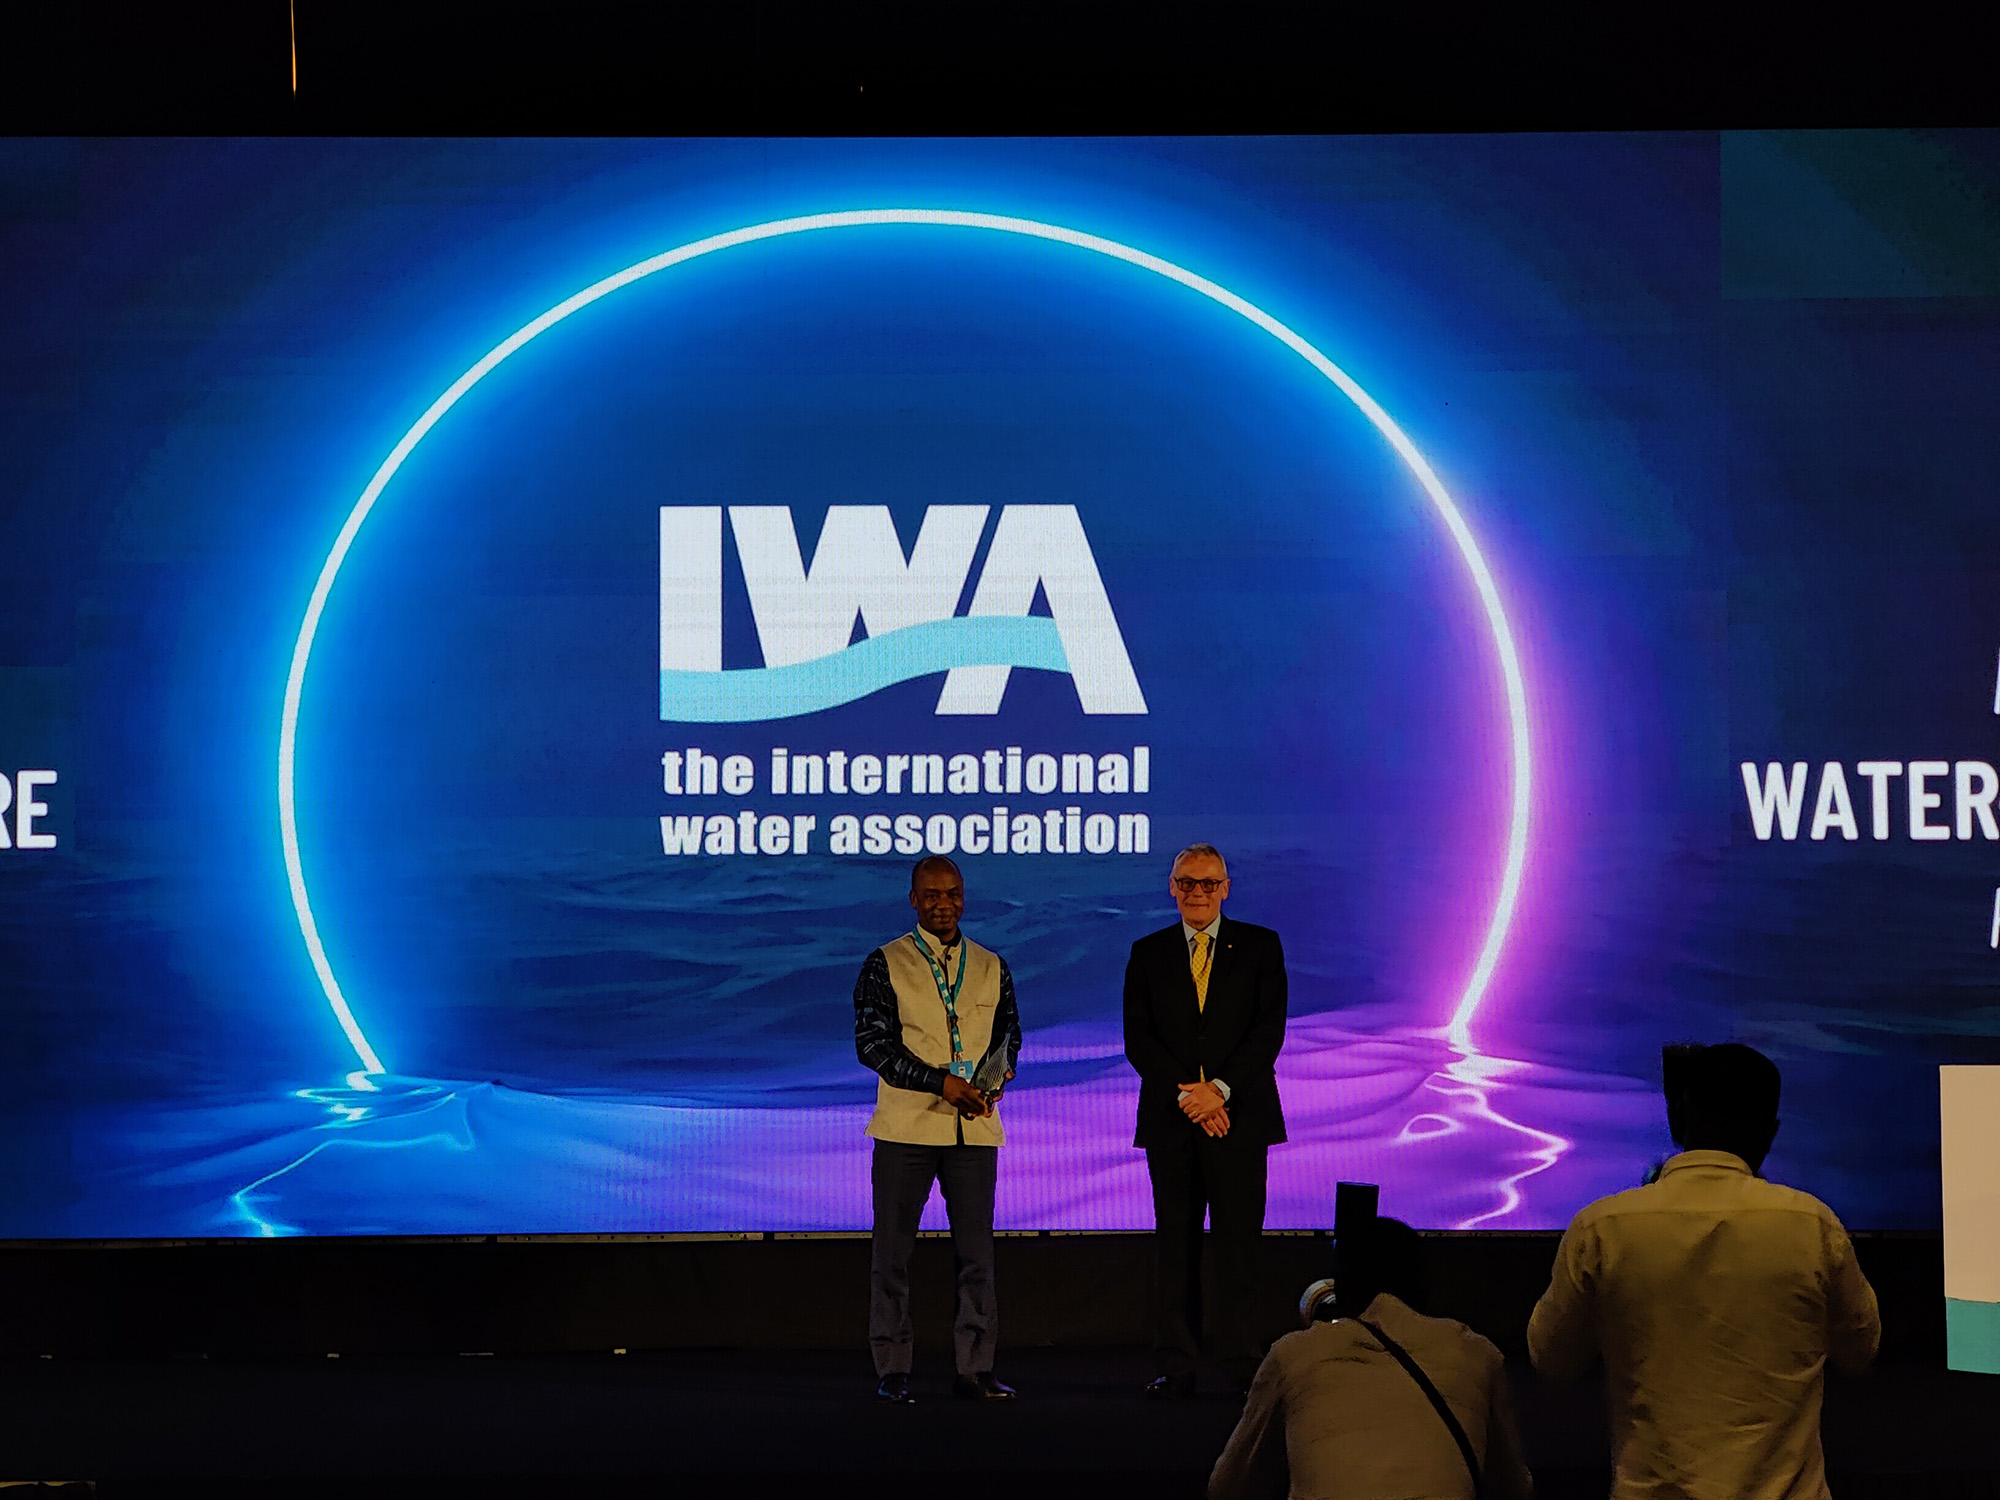 IWA Development Congress Joint Conference Booth